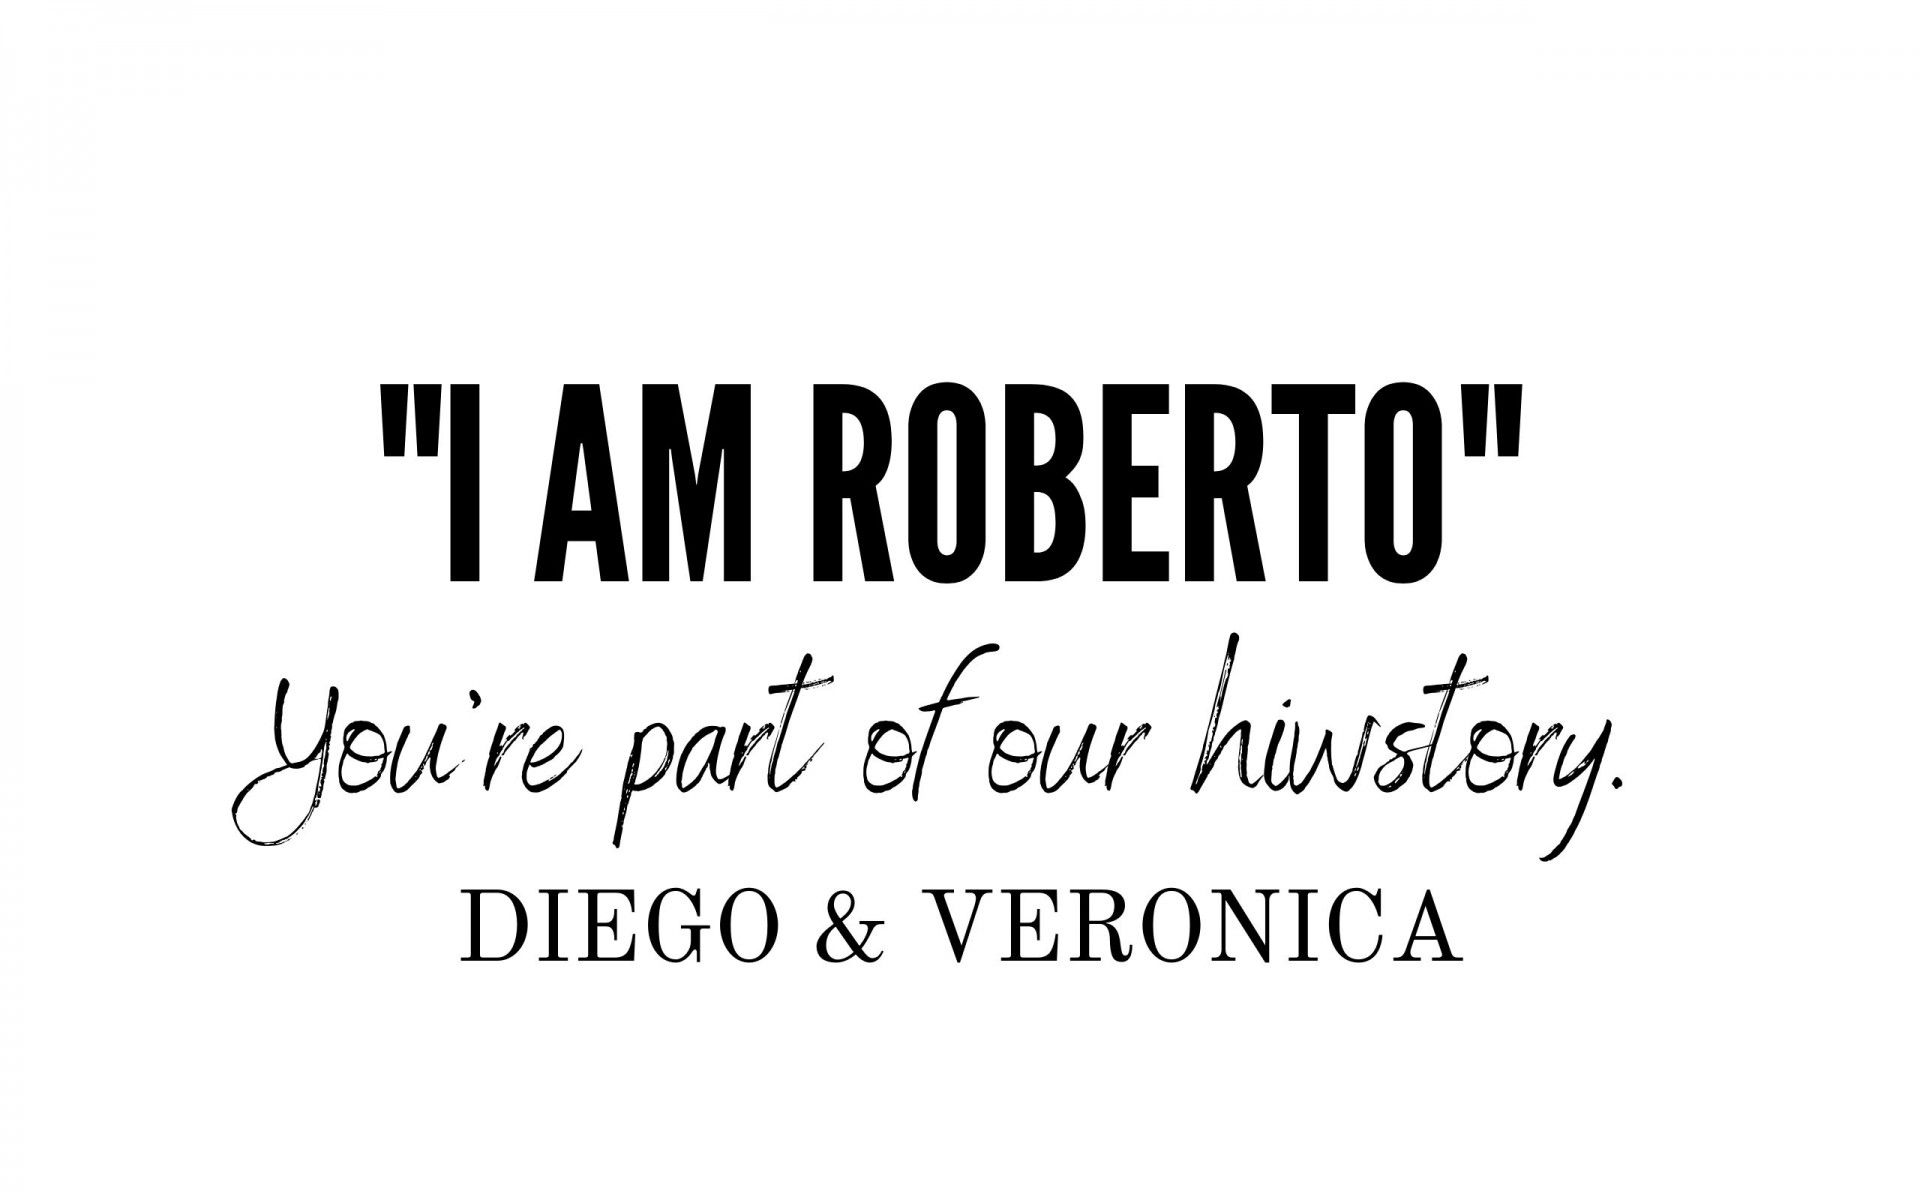 You are part of our history - Diego & Veronica